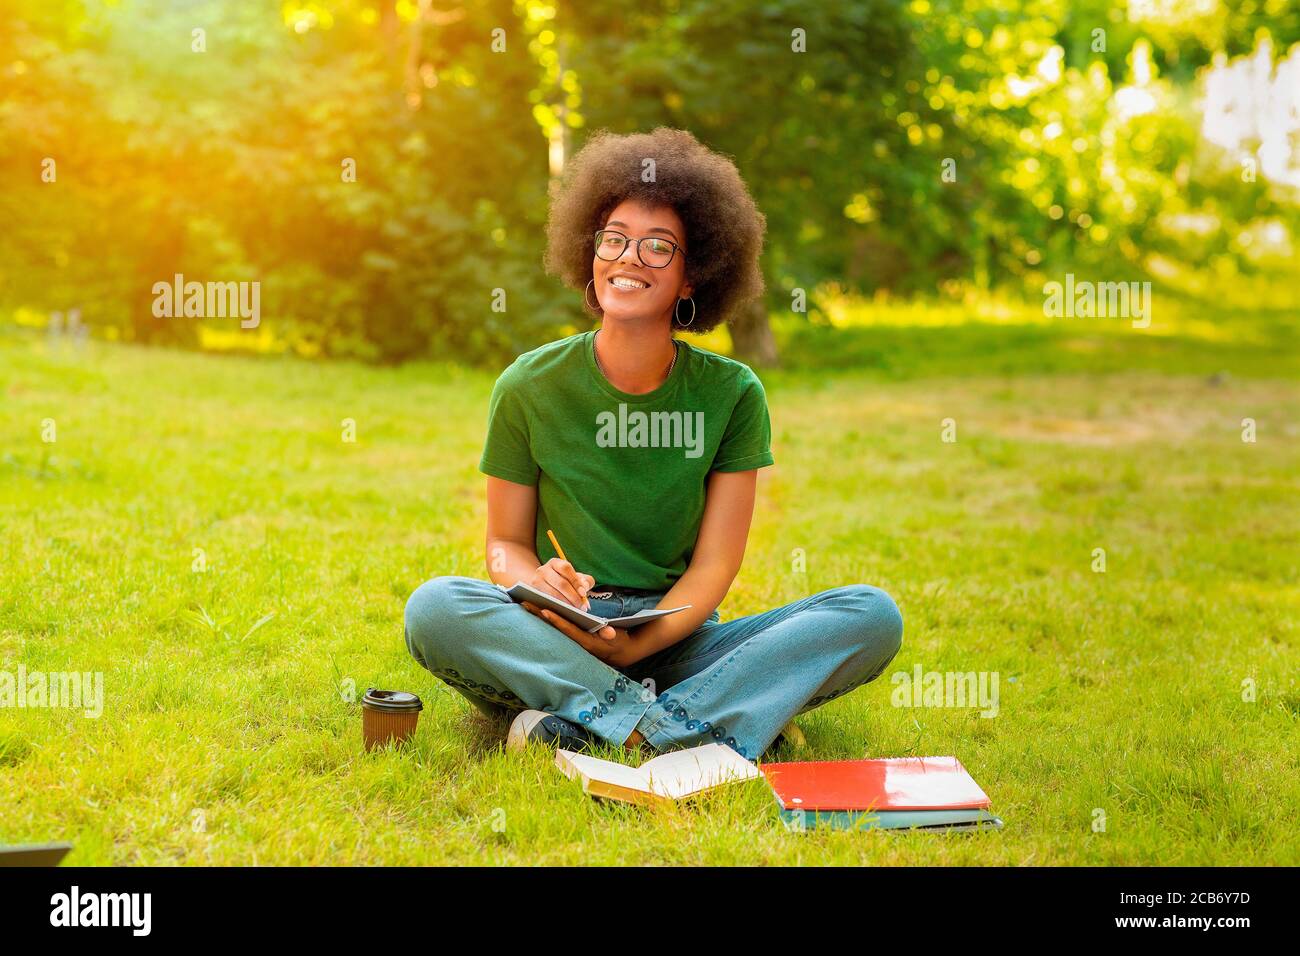 Portrait Of Black Cheerful College Student Girl Posing While Studying Outdoors Stock Photo